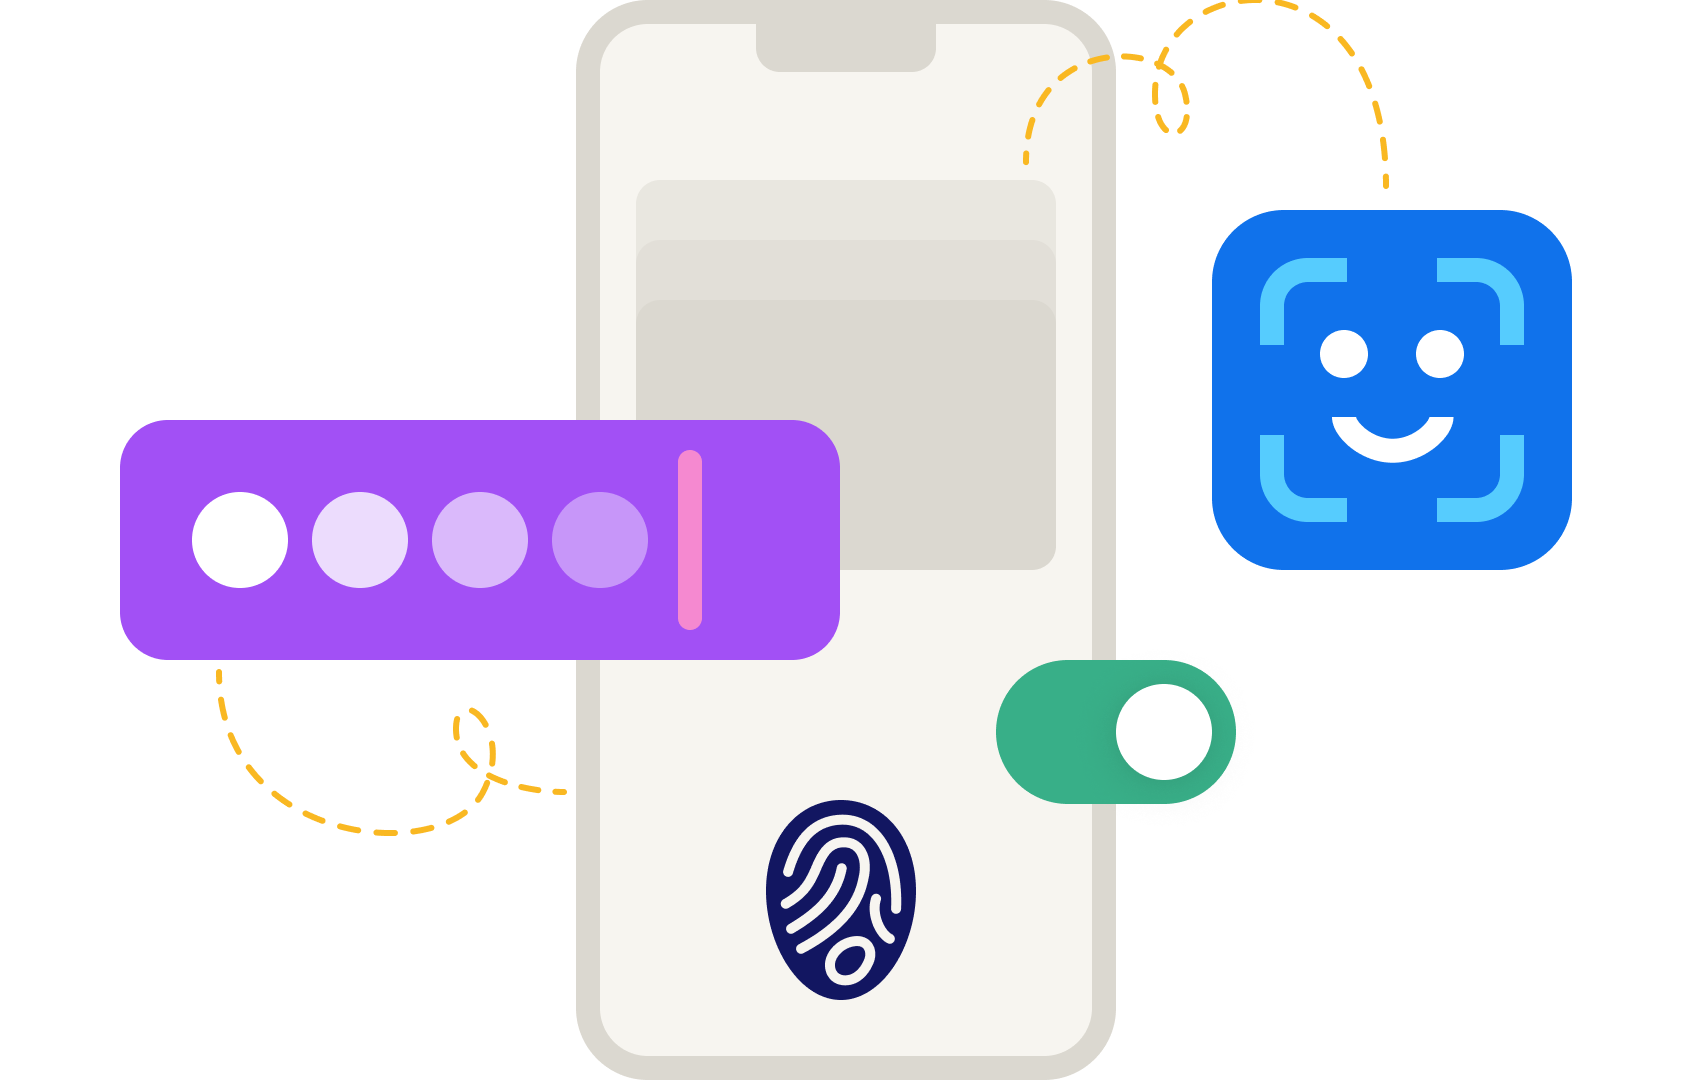 An illustration of a mobile phone with icons representing authentication technologies, such as face and fingerprint recognition